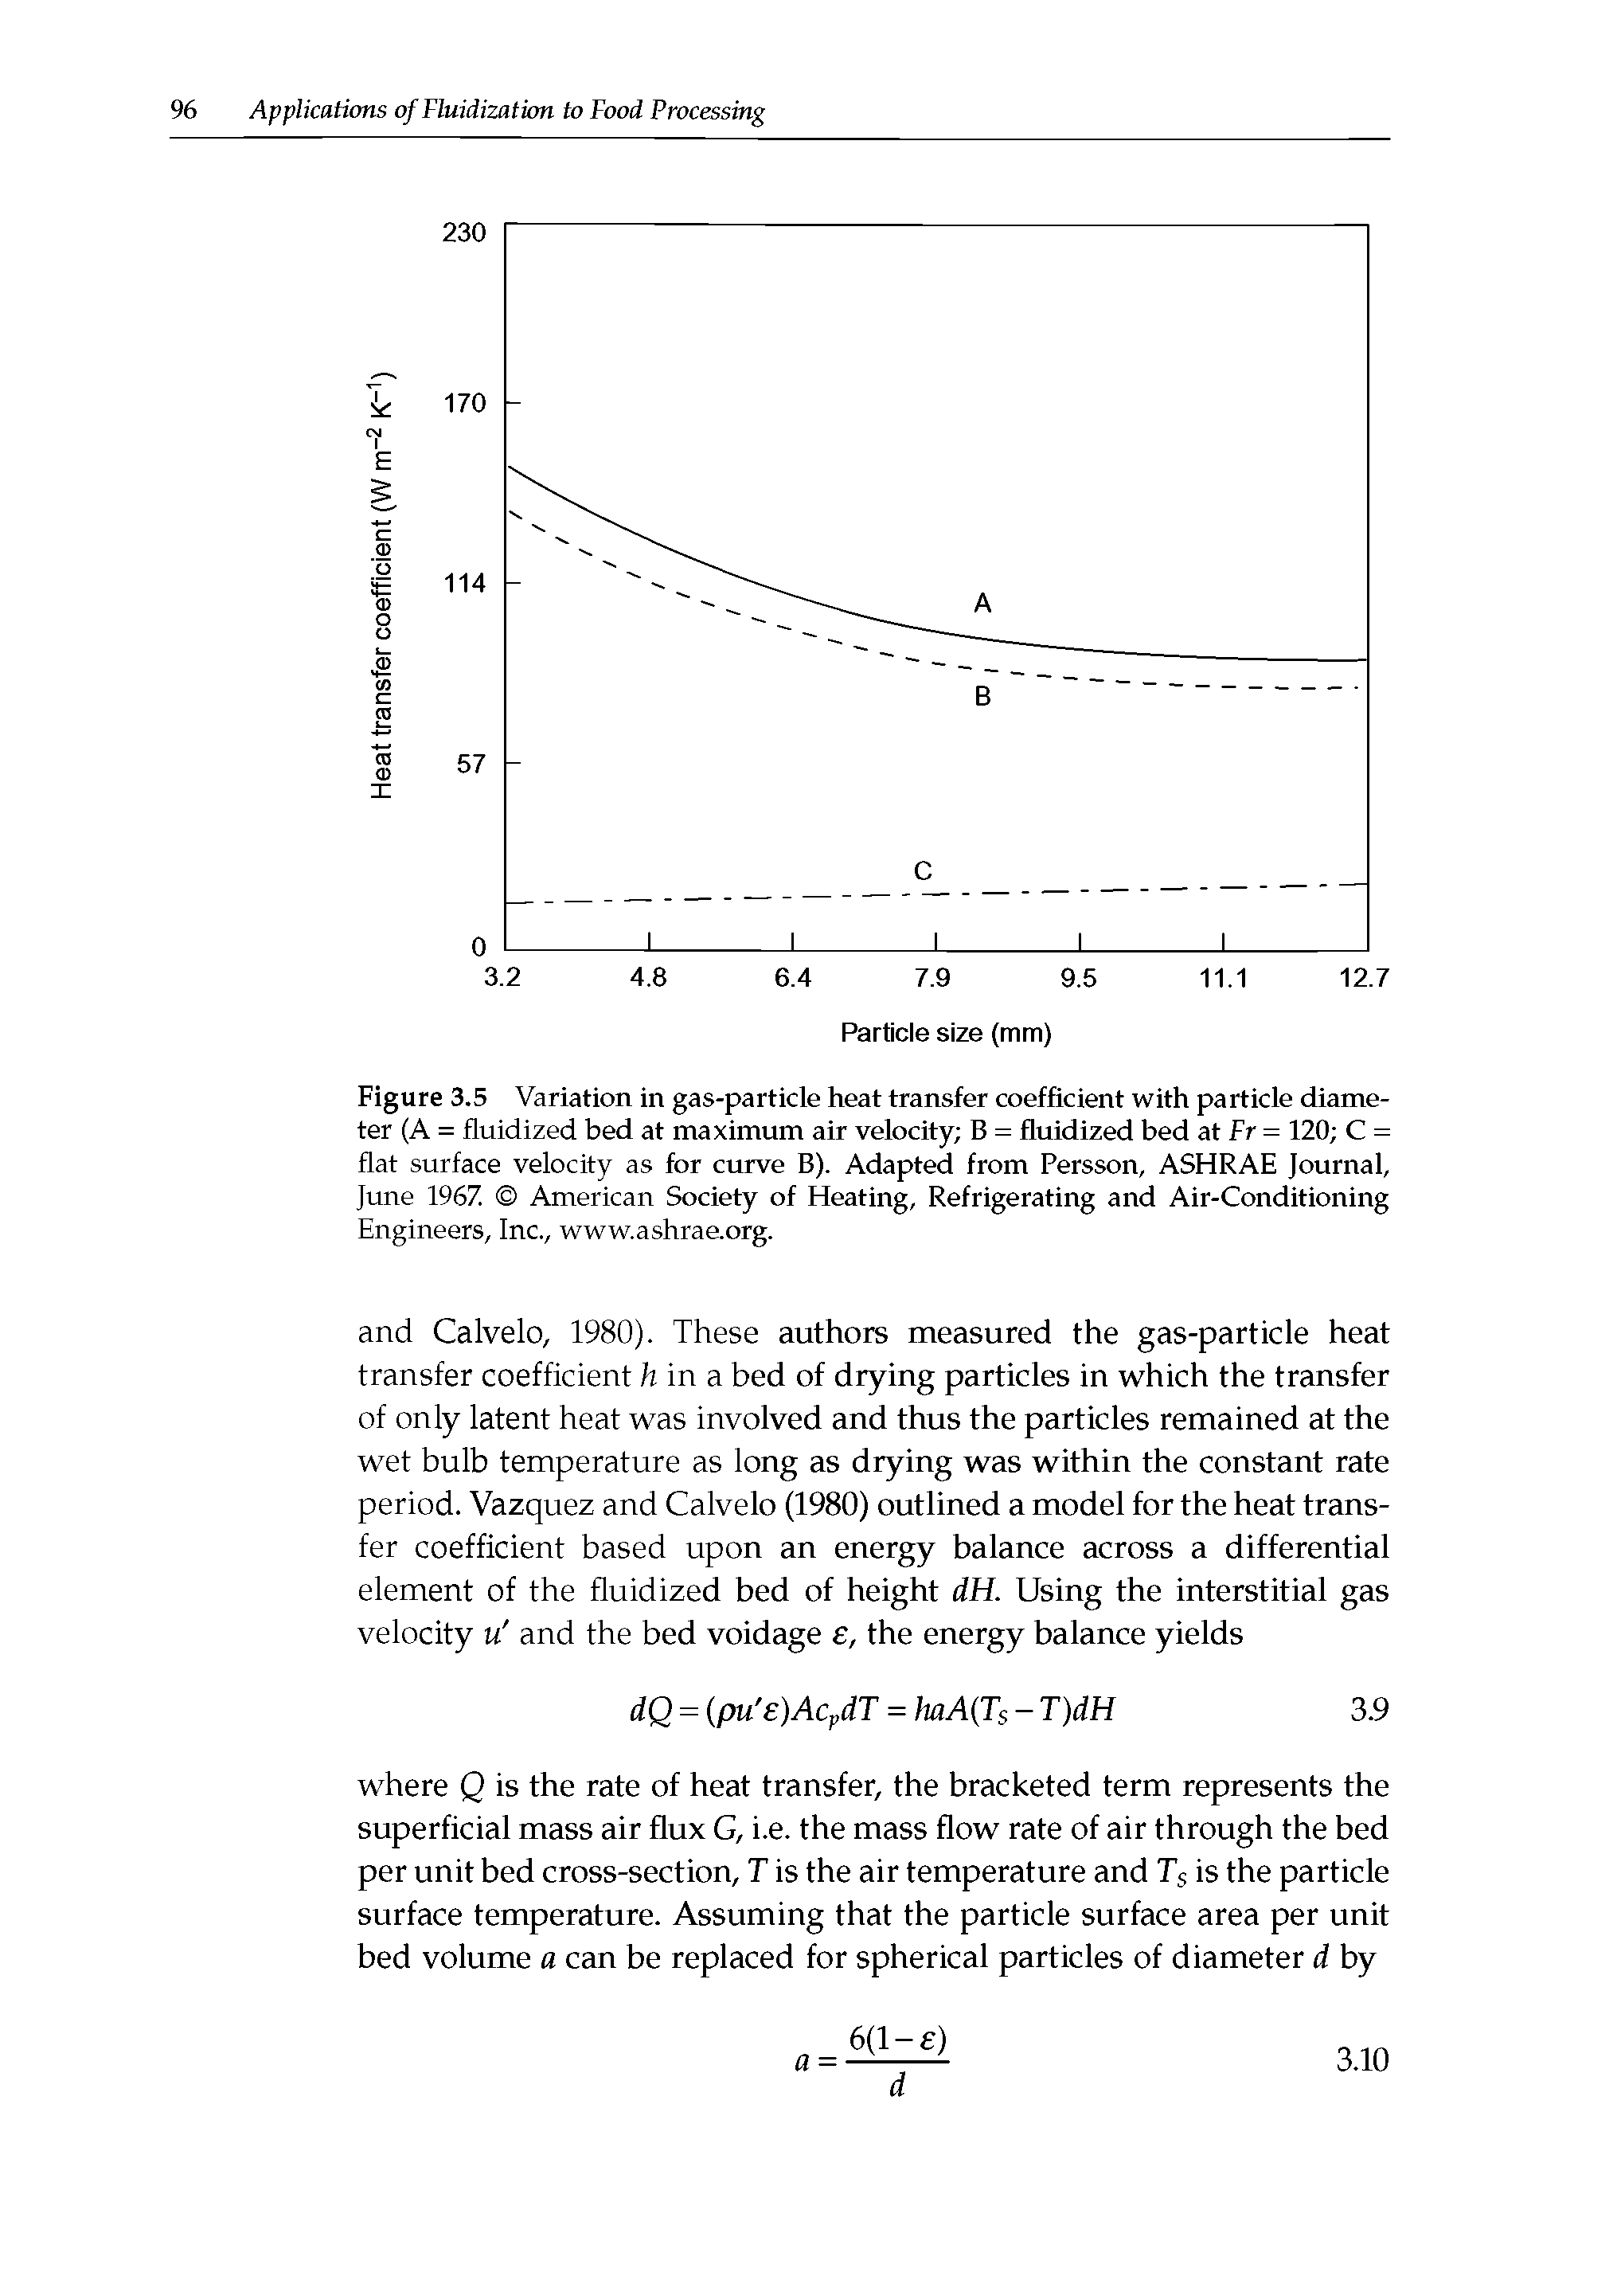 Figure 3.5 Variation in gas-particle heat transfer coefficient with particle diameter (A = fluidized bed at maximum air velocity B = fluidized bed at Fr = 120 C = flat surface velocity as for curve B). Adapted from Persson, ASHRAE Journal, June 1967. American Society of Heating, Refrigerating and Air-Conditioning...